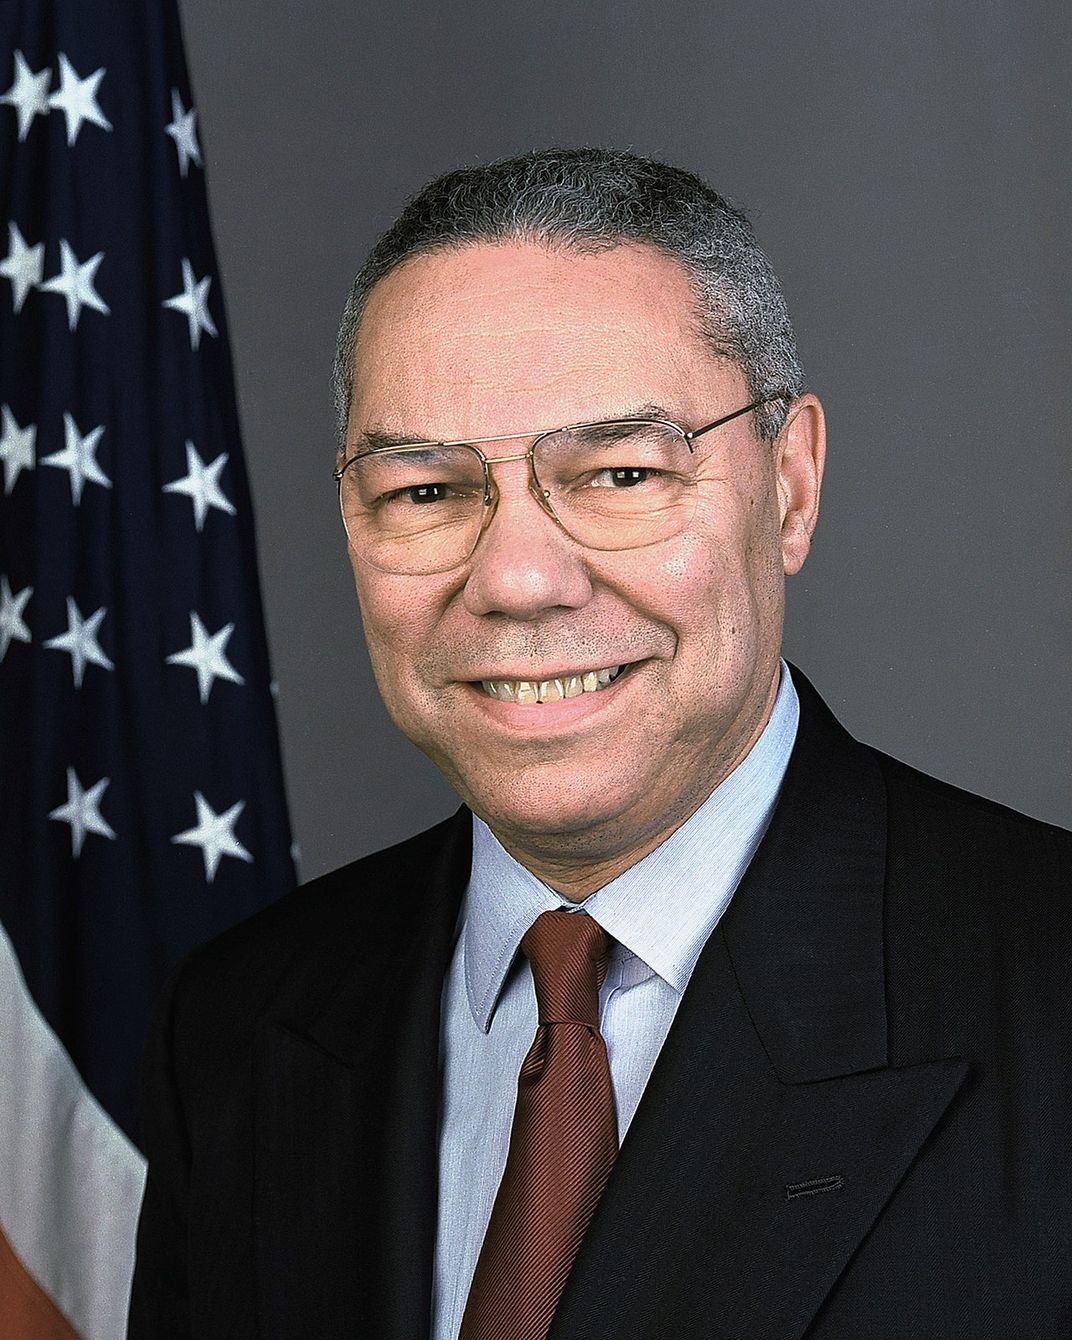 Powell's official portrait as secretary of state